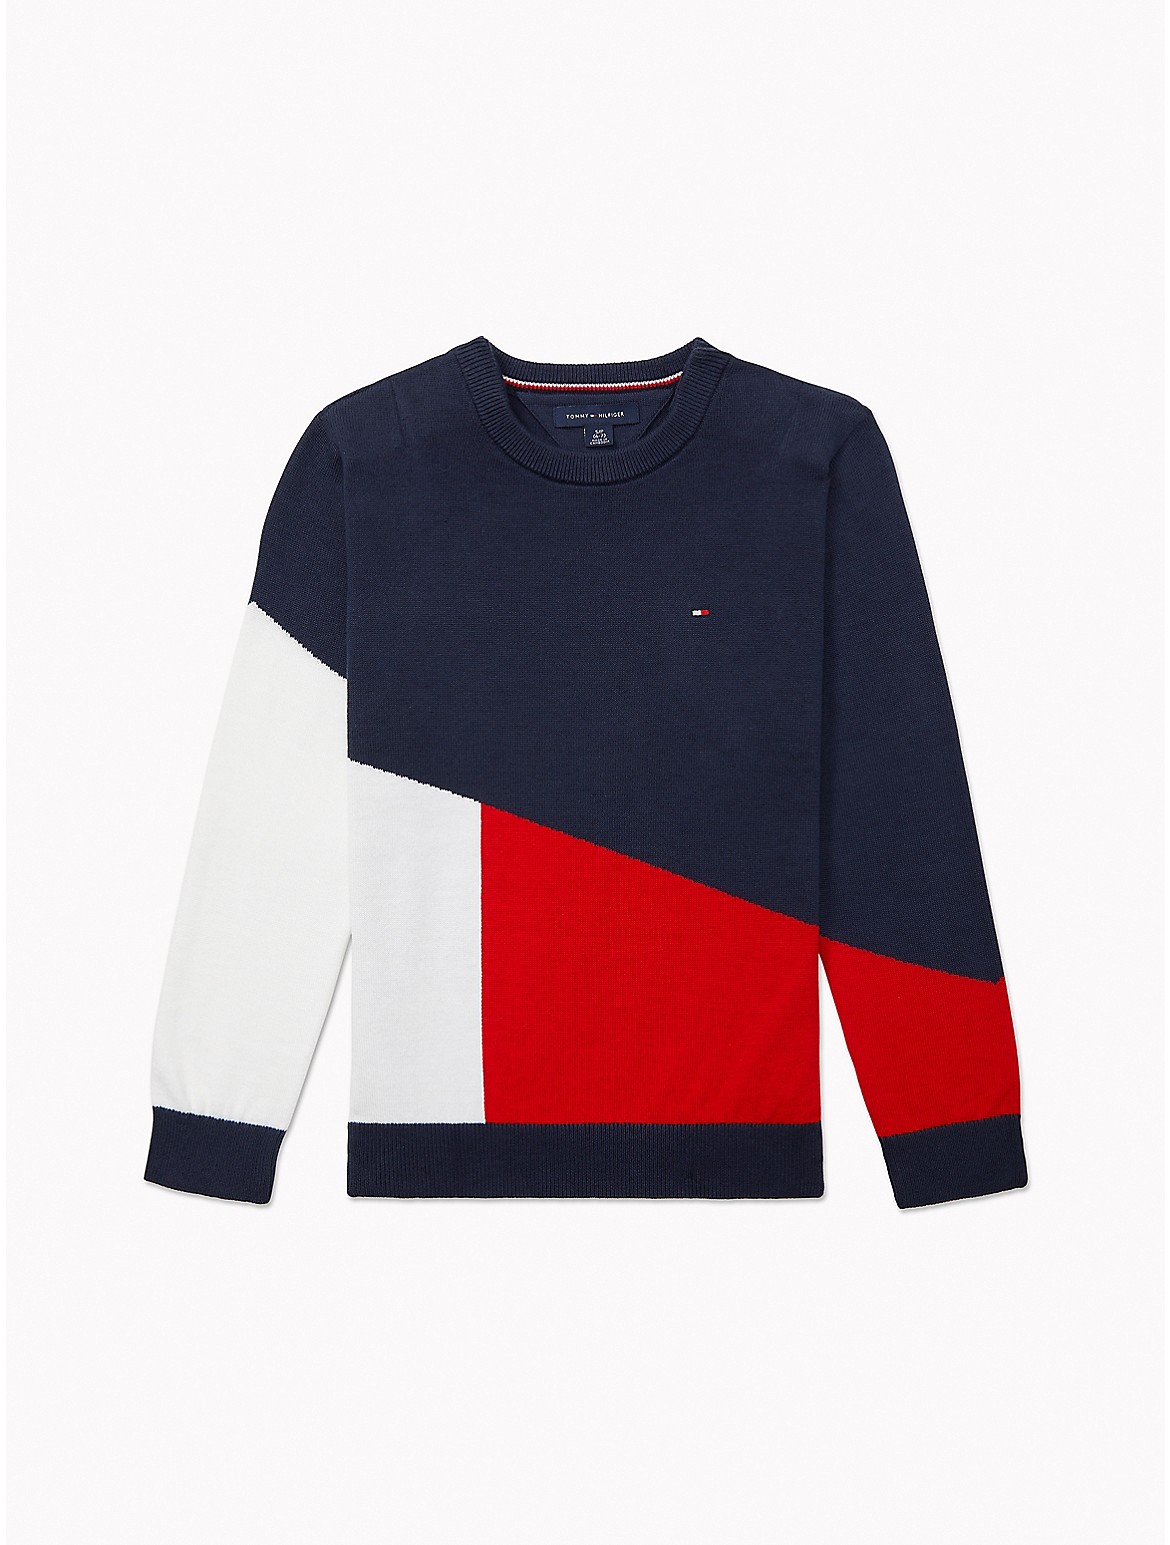 Tommy Hilfiger Boys' Colorblock Sweater - Blue - S